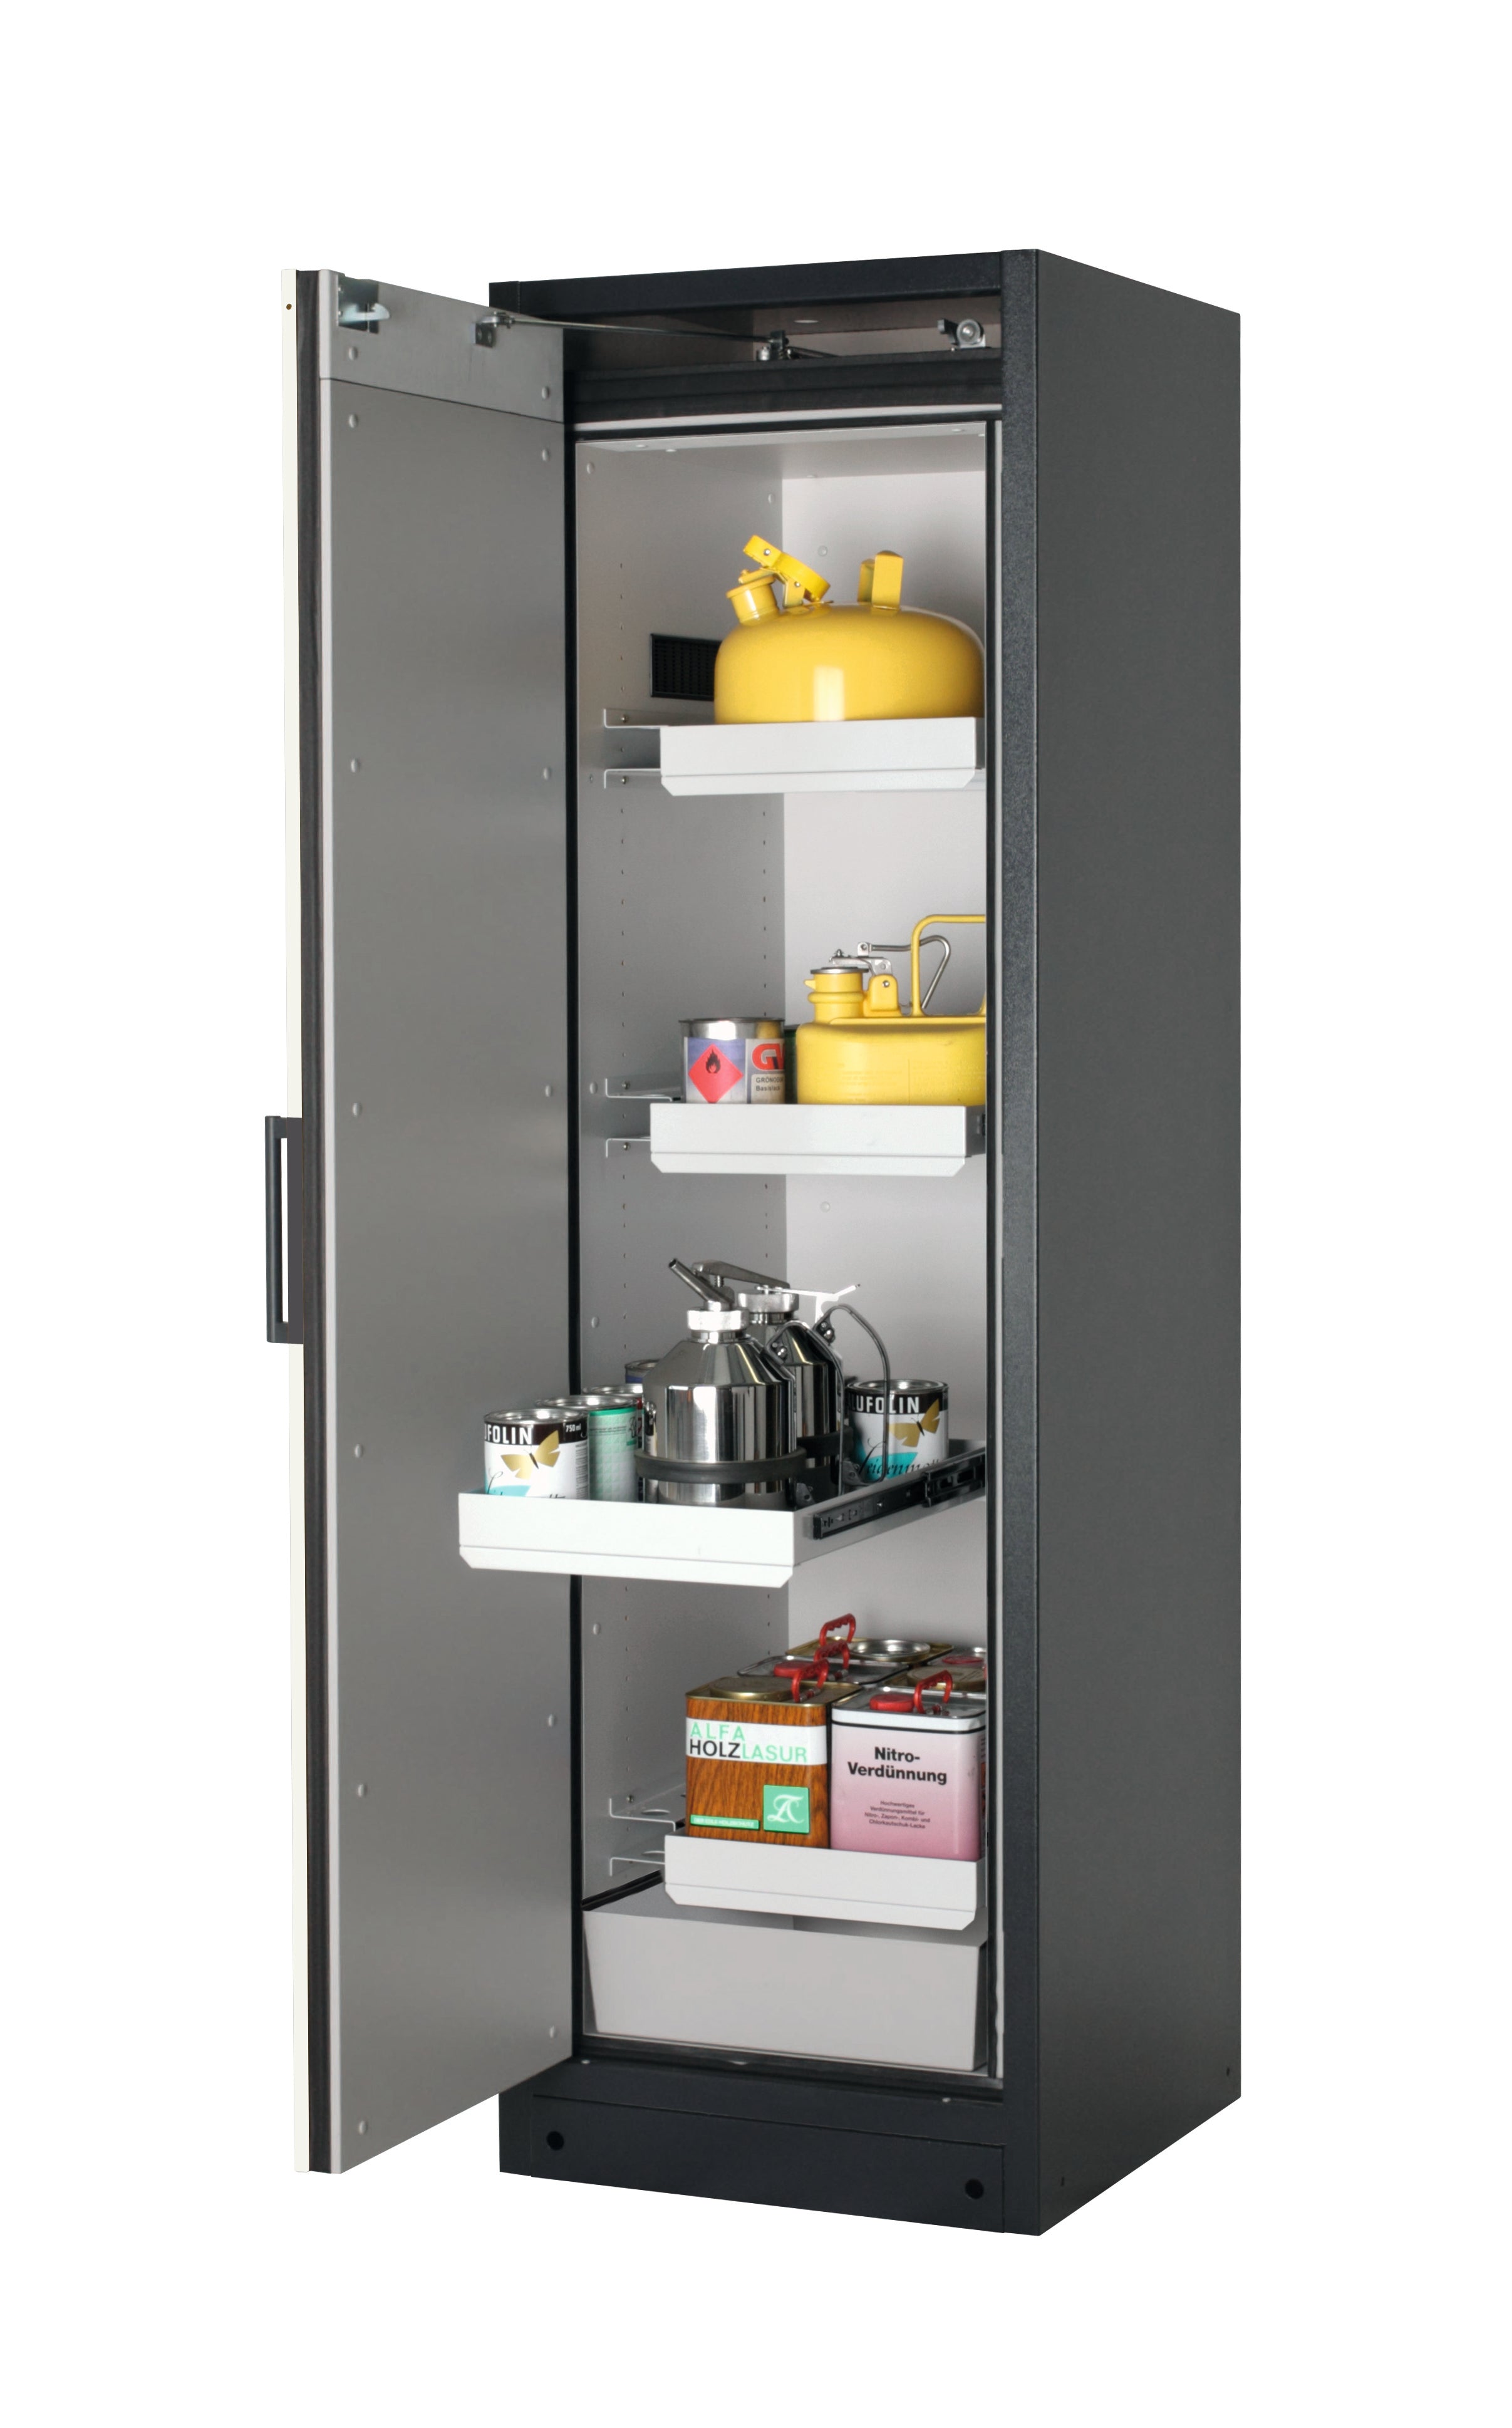 Type 90 safety storage cabinet Q-PEGASUS-90 model Q90.195.060.WDAC in asecos silver with 3x drawer (standard) (sheet steel),